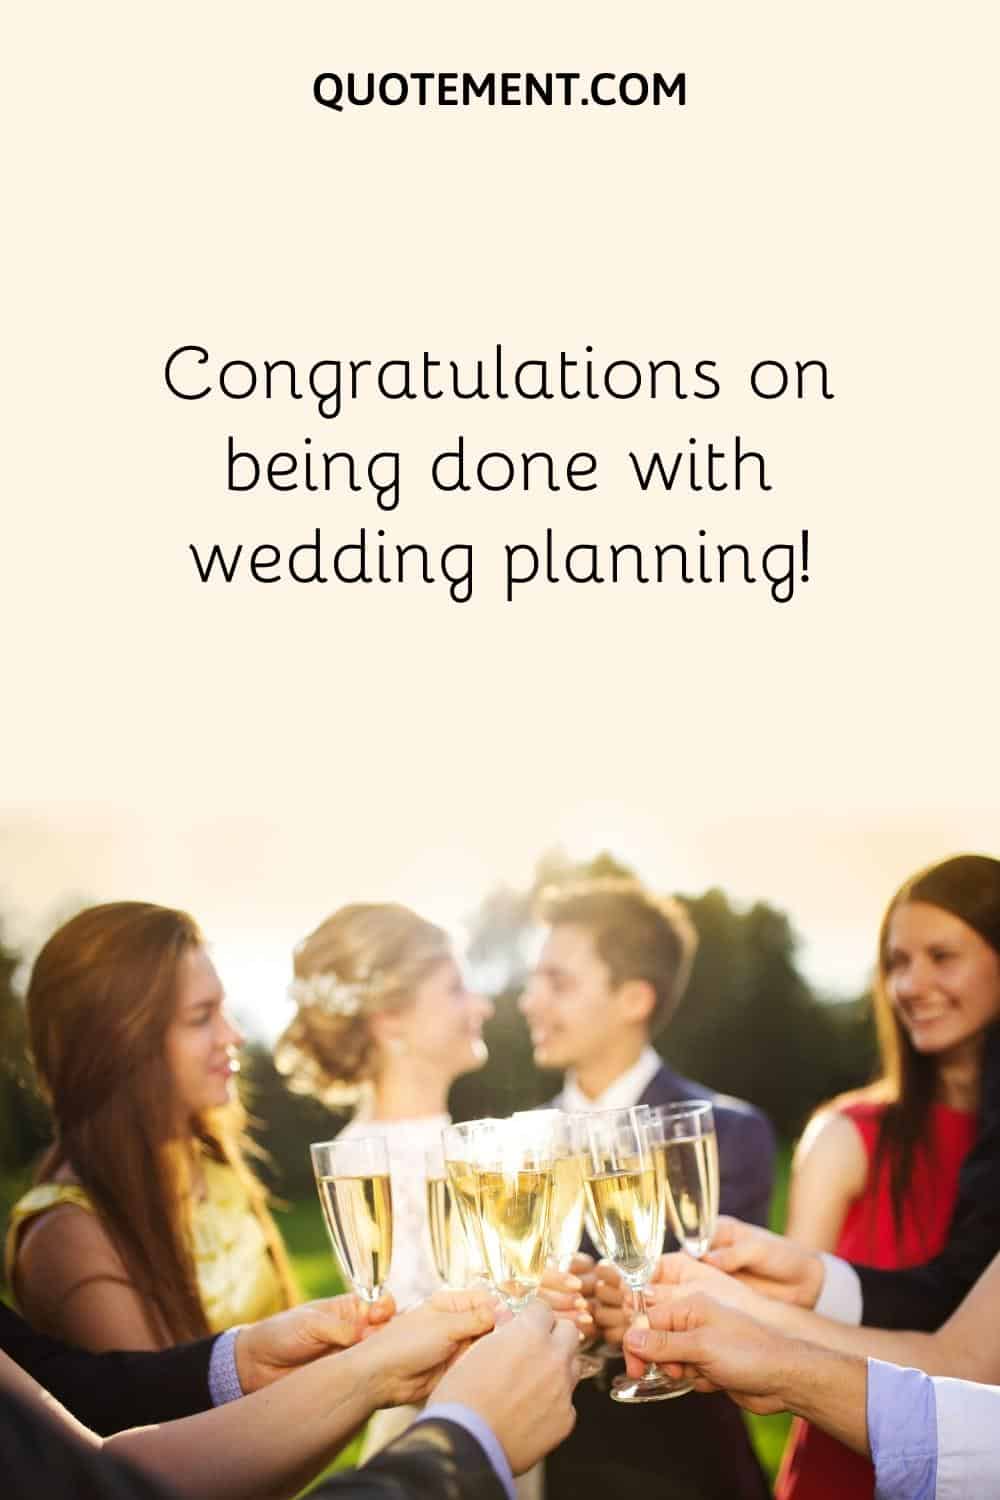 Congratulations on being done with wedding planning!